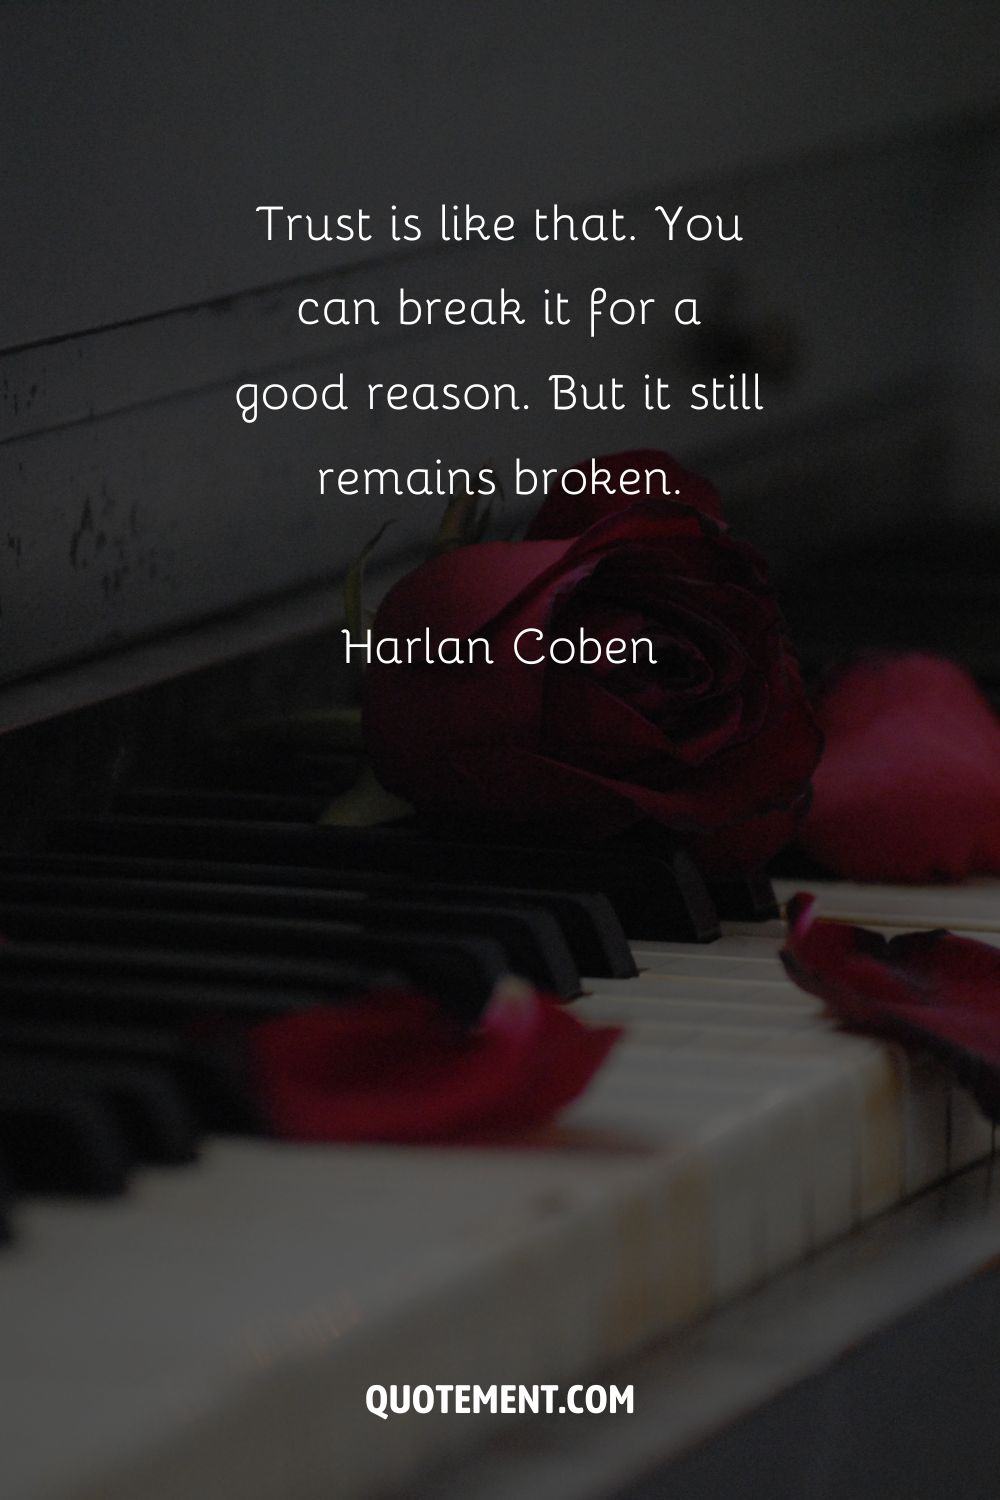 “Trust is like that. You can break it for a good reason. But it still remains broken.”